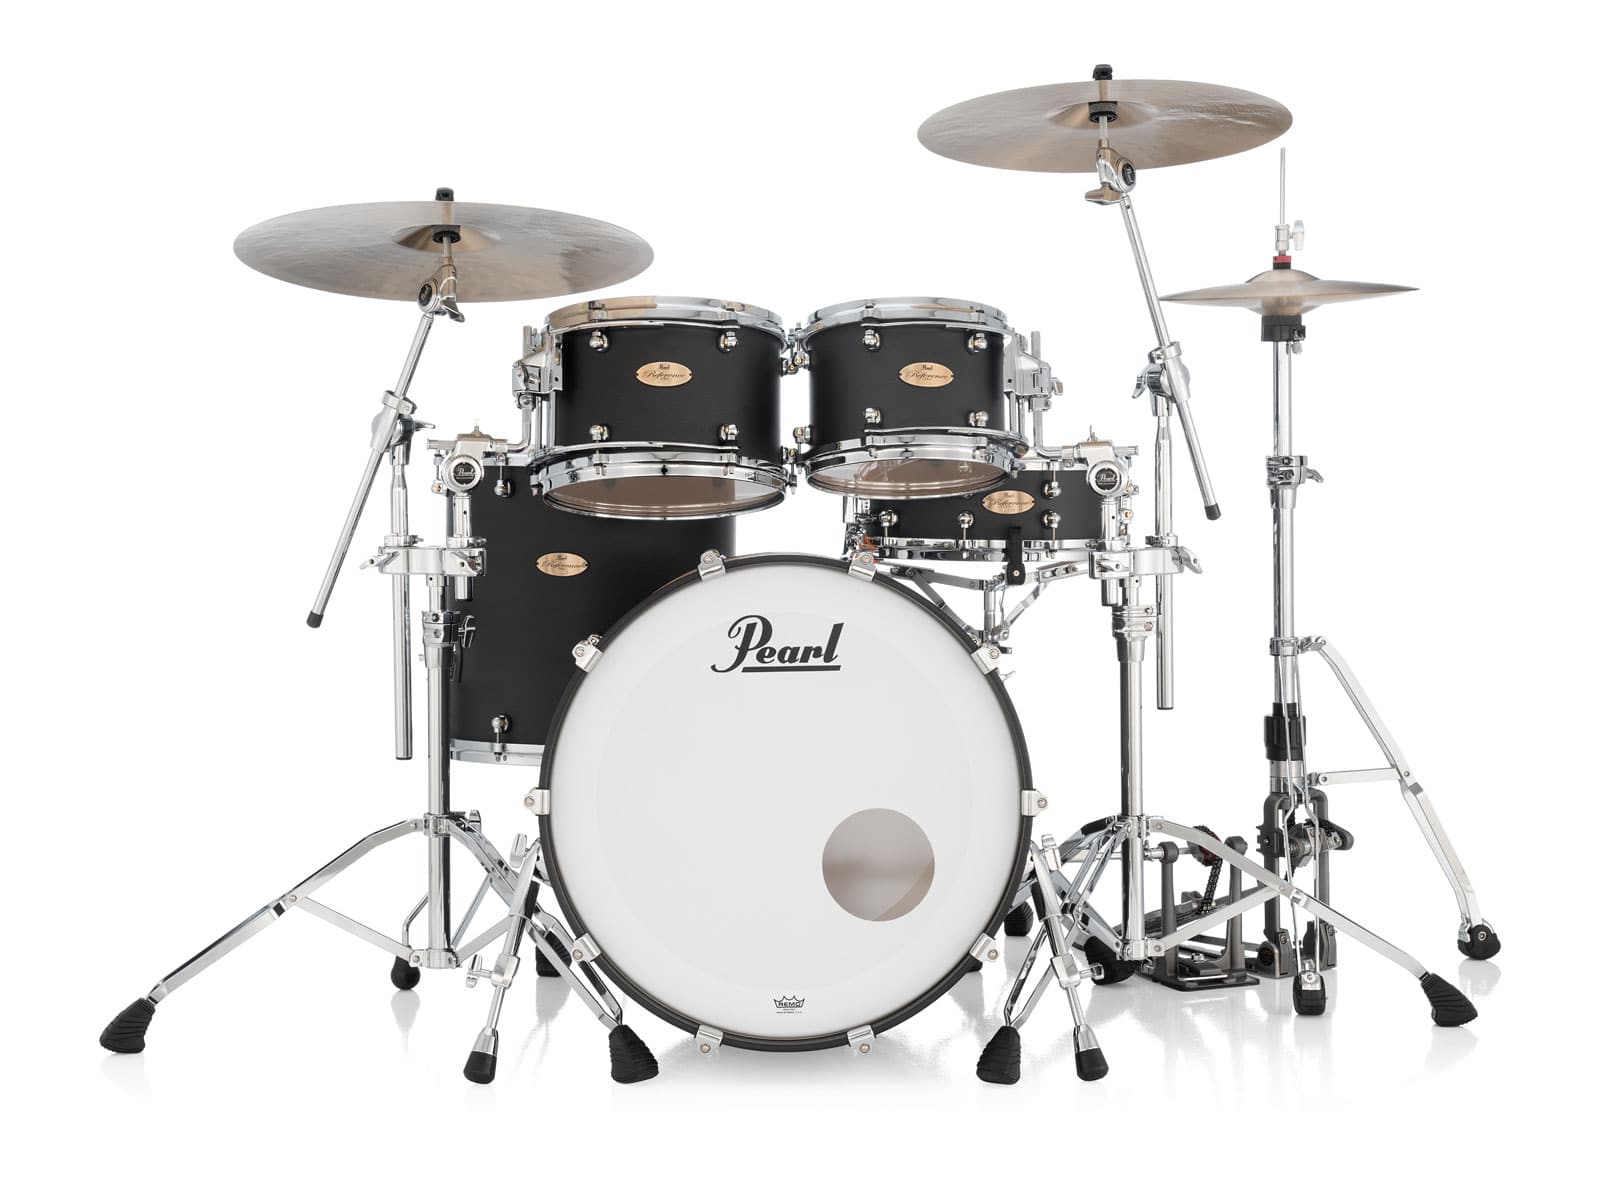 PEARL DRUMS REFERENCE ONE ROCK 22